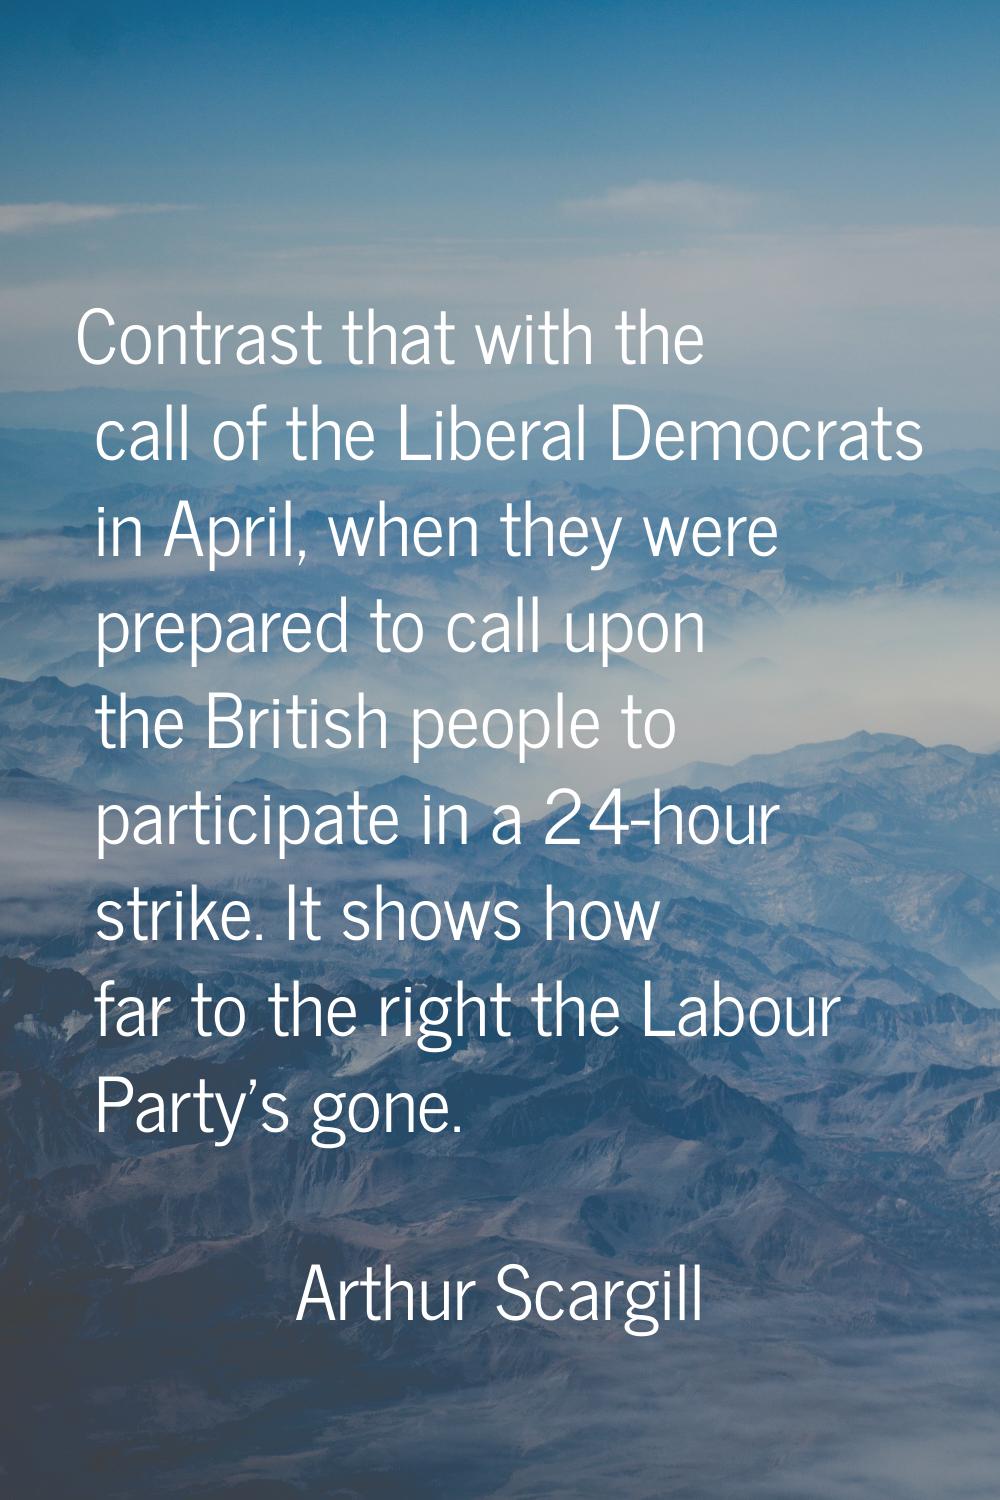 Contrast that with the call of the Liberal Democrats in April, when they were prepared to call upon